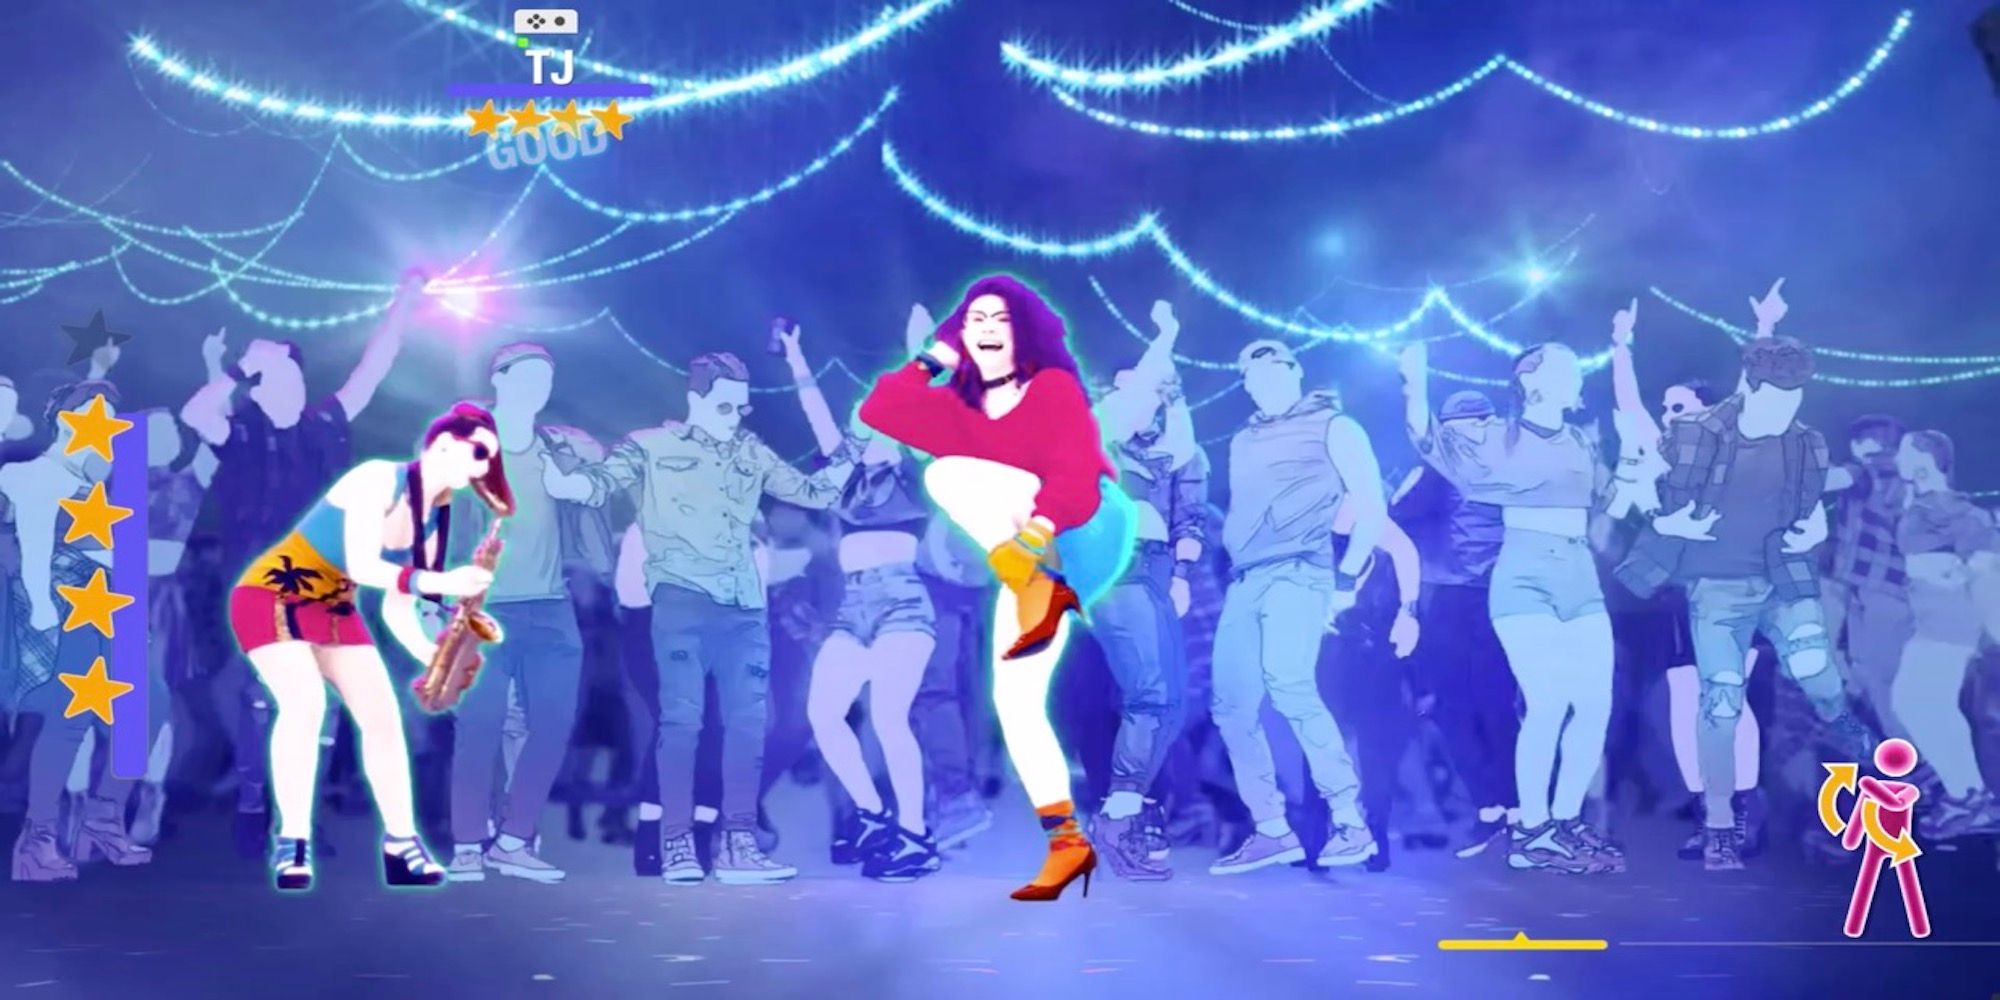 Just Dance 2022 doesn't break new ground but remains as fun as